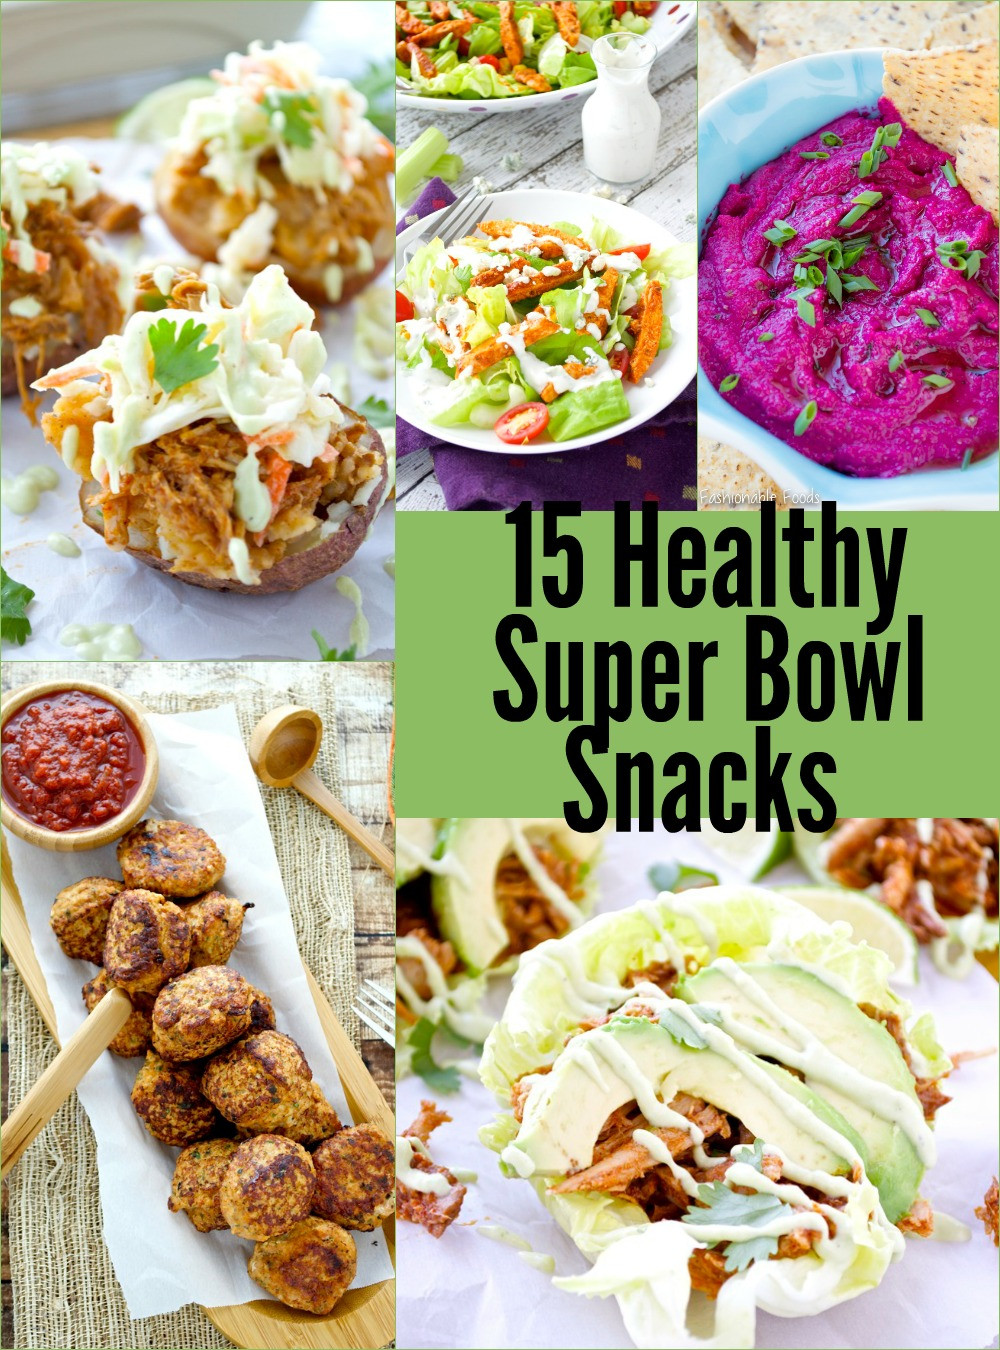 Super Bowl Munchies Recipes
 Healthy Super Bowl Snacks Fashionable Foods